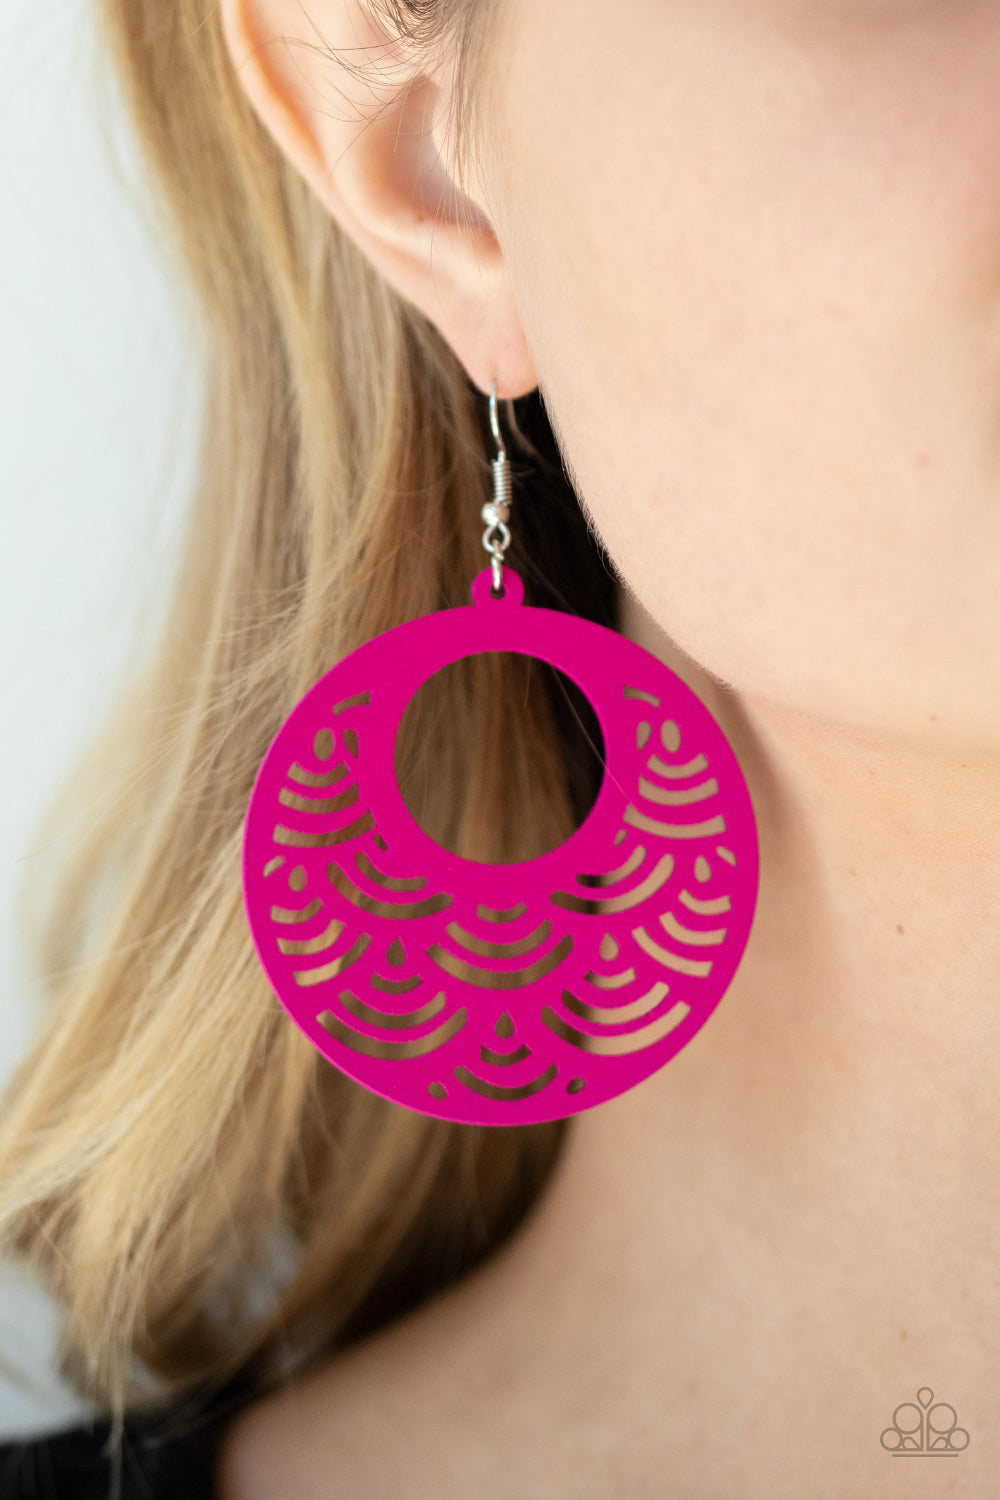 SEA Le Vie! - Pink Wood Fashion Earrings - Paparazzi Accessories - Stenciled in an airy scalloped cutout pattern, a vivacious pink wooden frame swings from the ear for a colorful tropical inspiration. Earring attaches to a standard fishhook fitting. Sold as one pair of earrings.